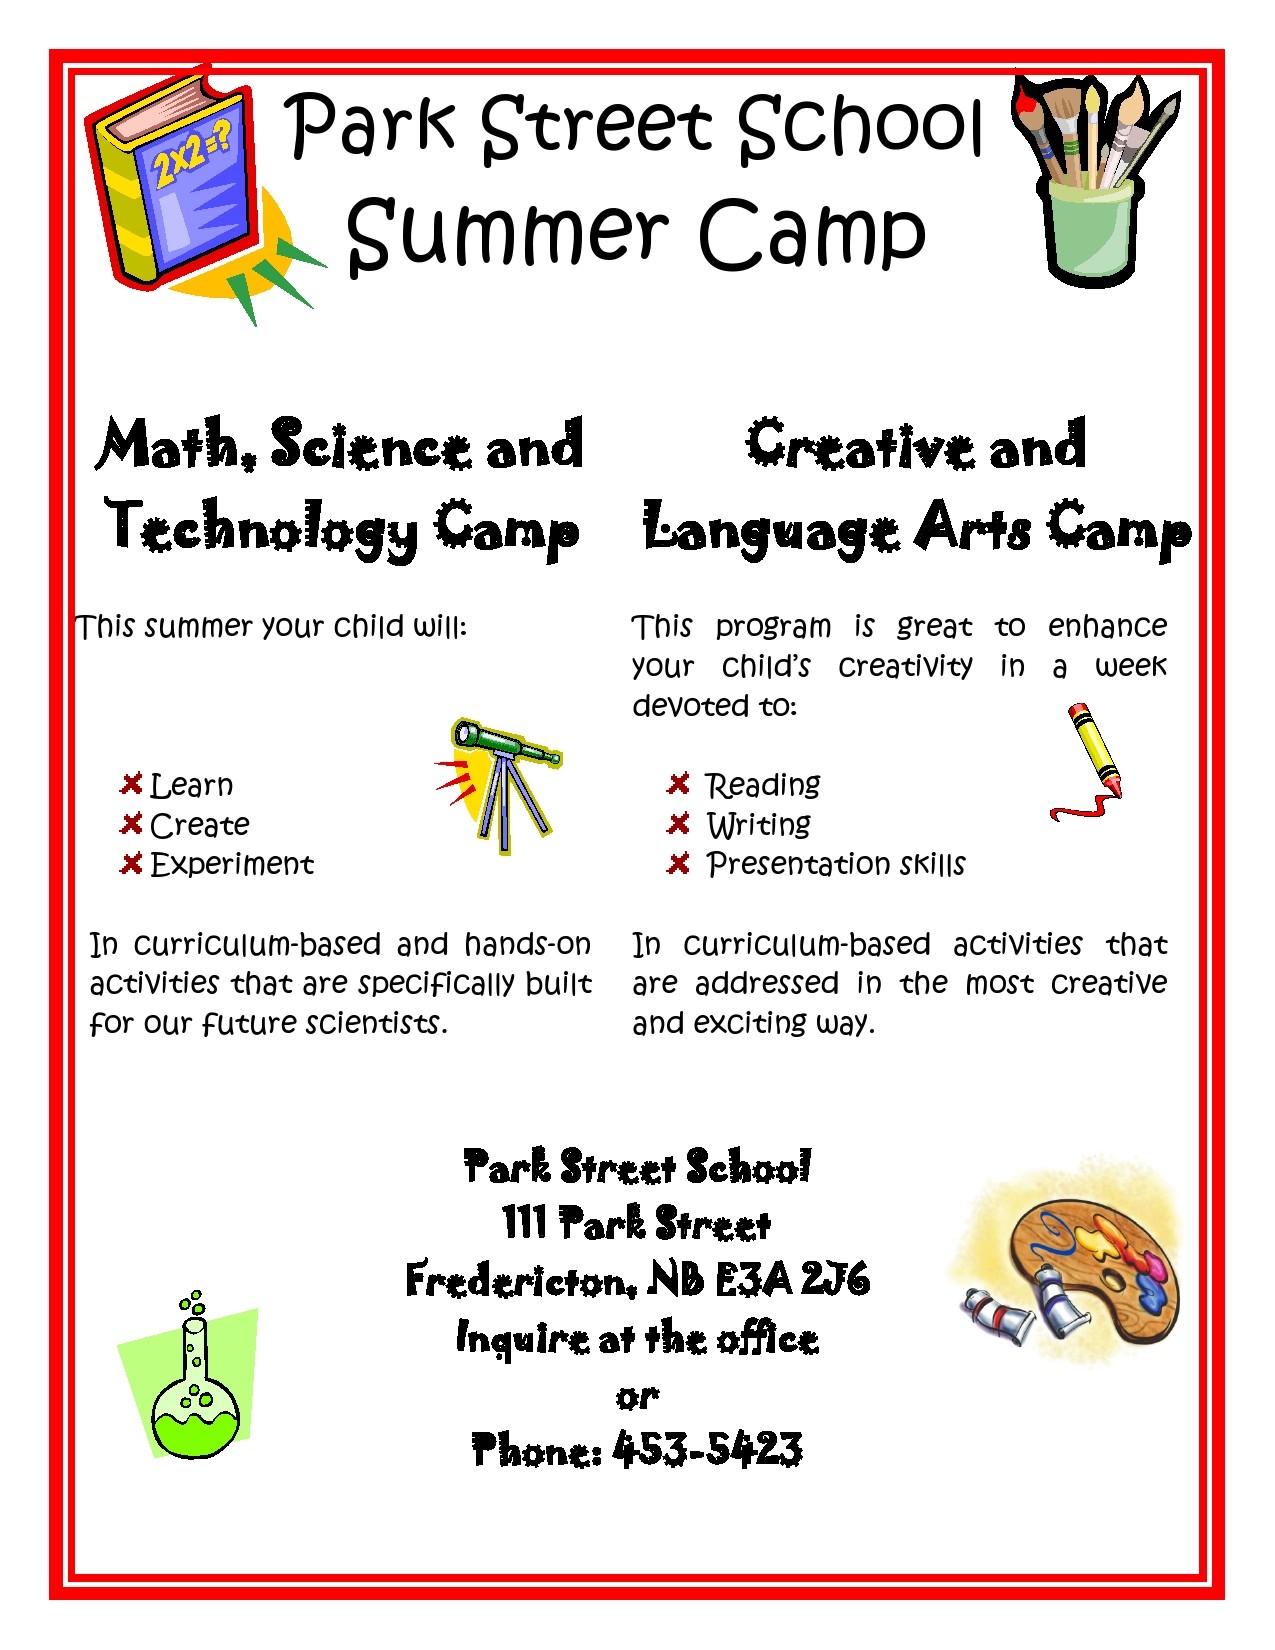 summer camp flyer template microsoft word, free summer camp flyer template word, summer camp flyer word template, summer camp flyer doc, editable summer camp flyer, summer camp flyer template free download